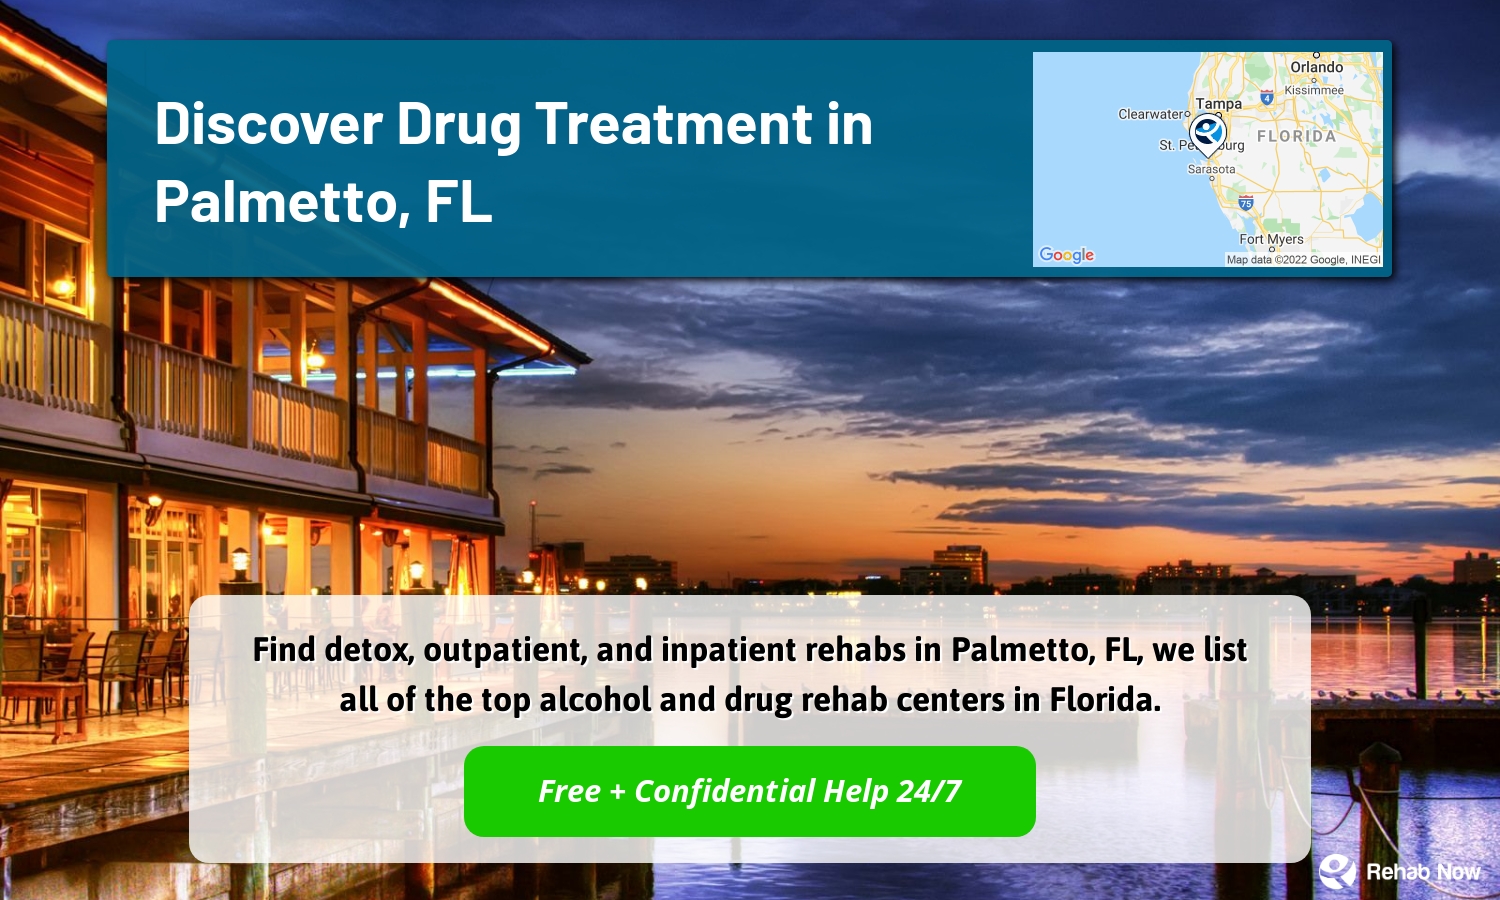 Find detox, outpatient, and inpatient rehabs in Palmetto, FL, we list all of the top alcohol and drug rehab centers in Florida.